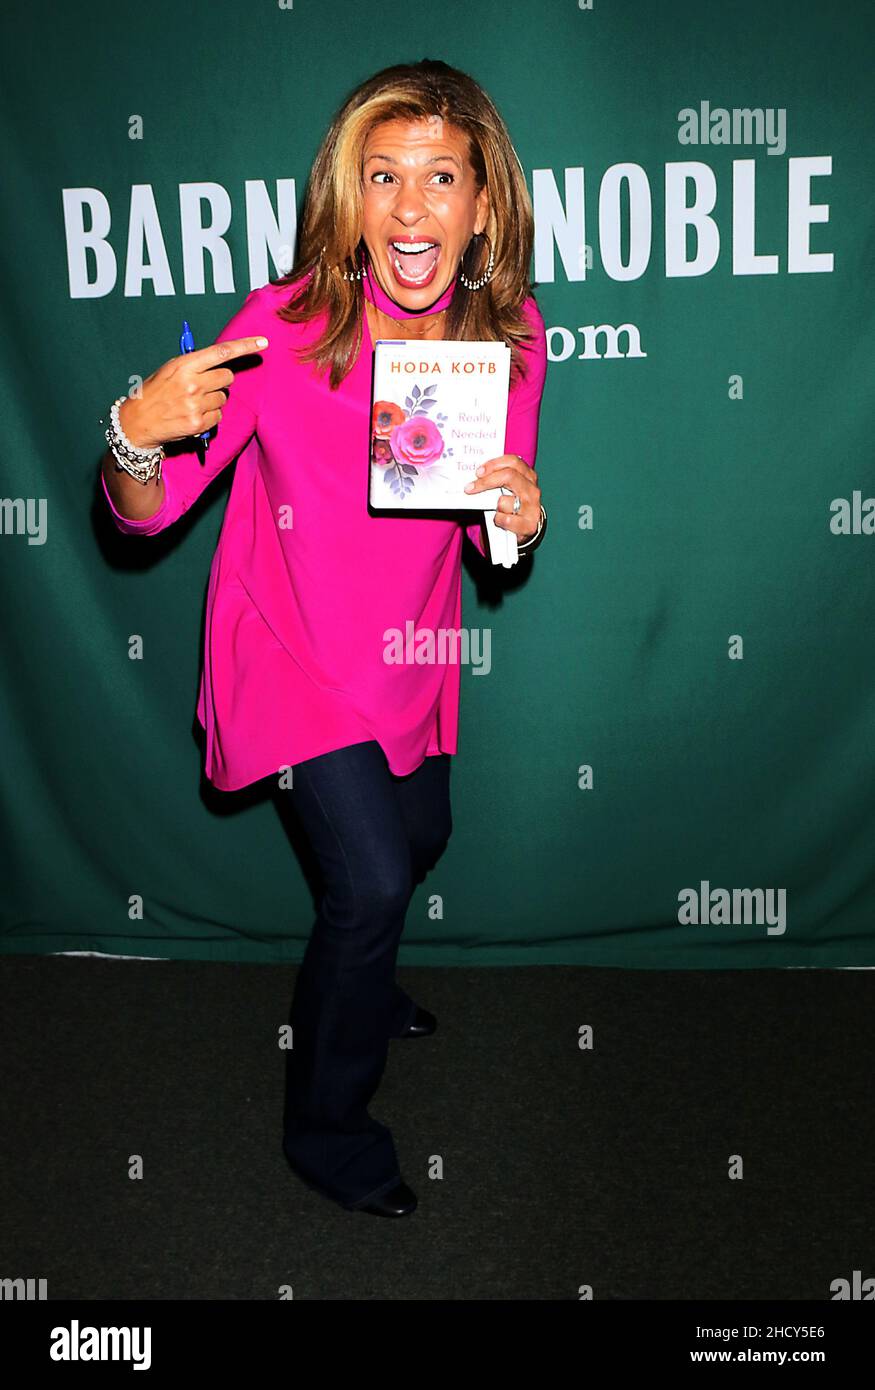 New York - NY - 20191014  Hoda Kotb signing her new bookI Really Needed This Today: Words to Live Byat Barnes & Noble Union Square.  -PICTURED: Hoda Kotb ROGER WONG Stock Photo